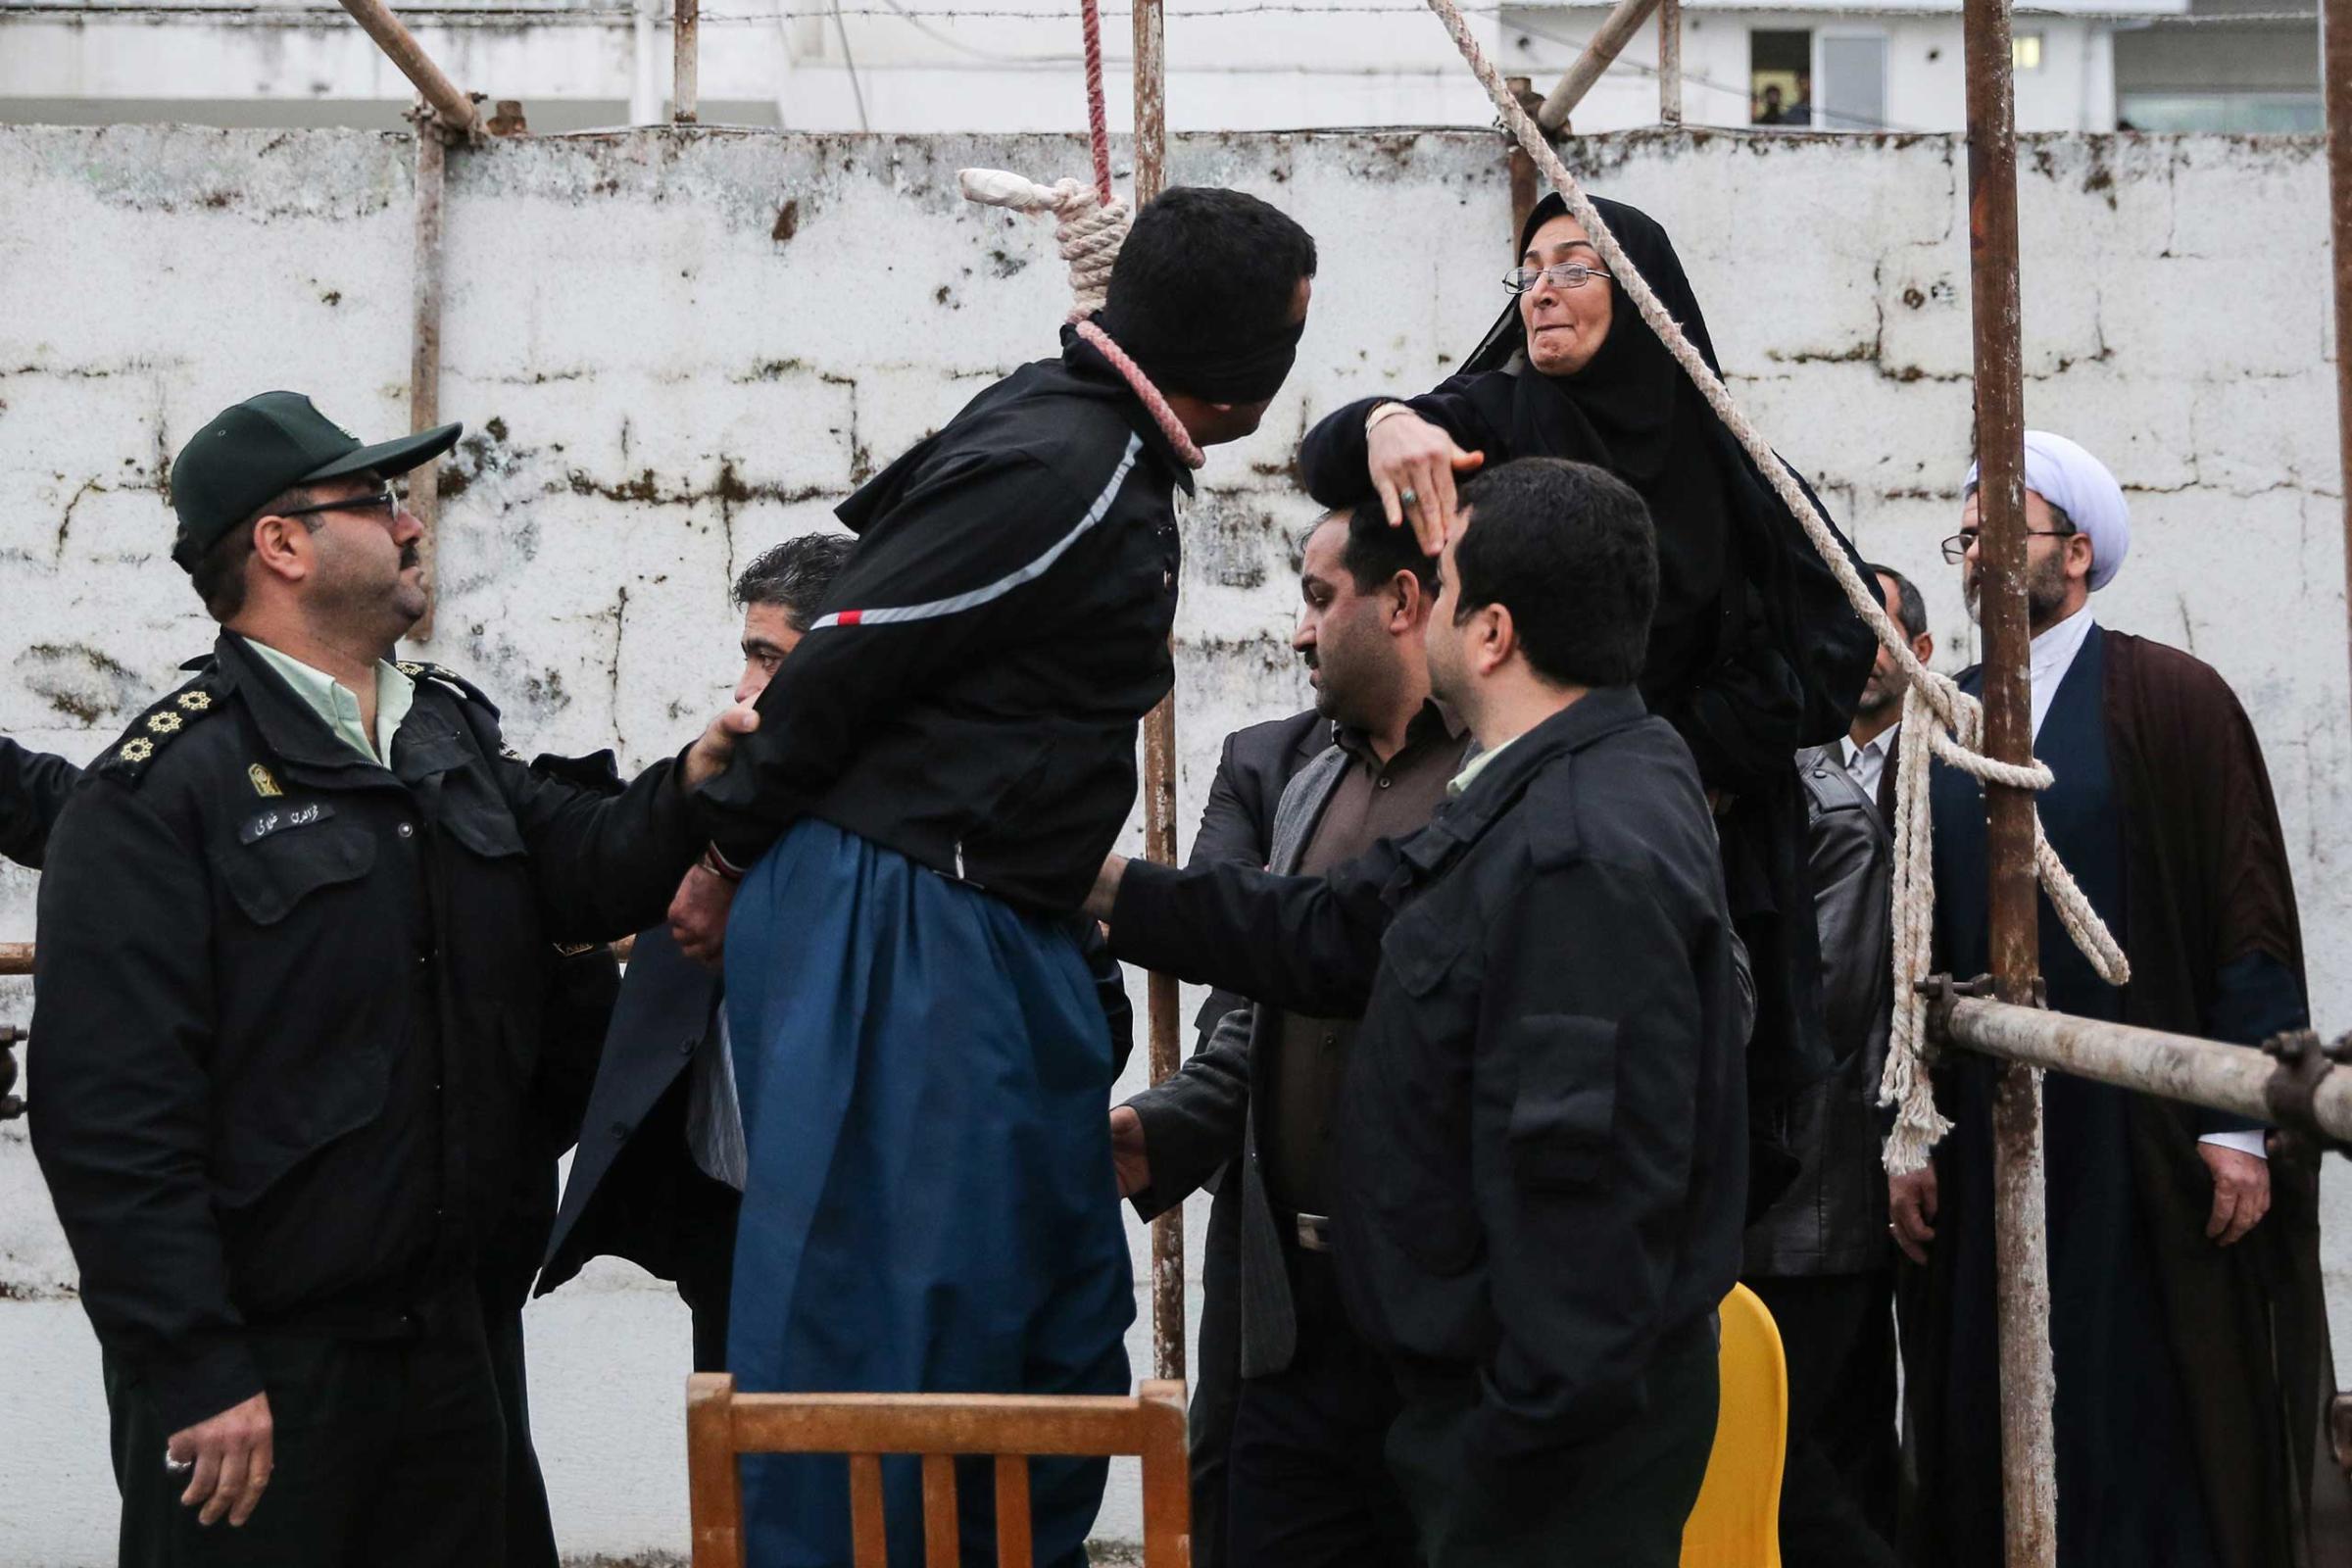 The mother of Abdolah Hosseinzadeh, who was murdered in 2007, slaps Balal who killed her son during the execution ceremony in the northern city of Nowshahr just before she removed the noose around his neck with the help of her husband, sparing the life of her son's convicted murderer, April 15, 2014.